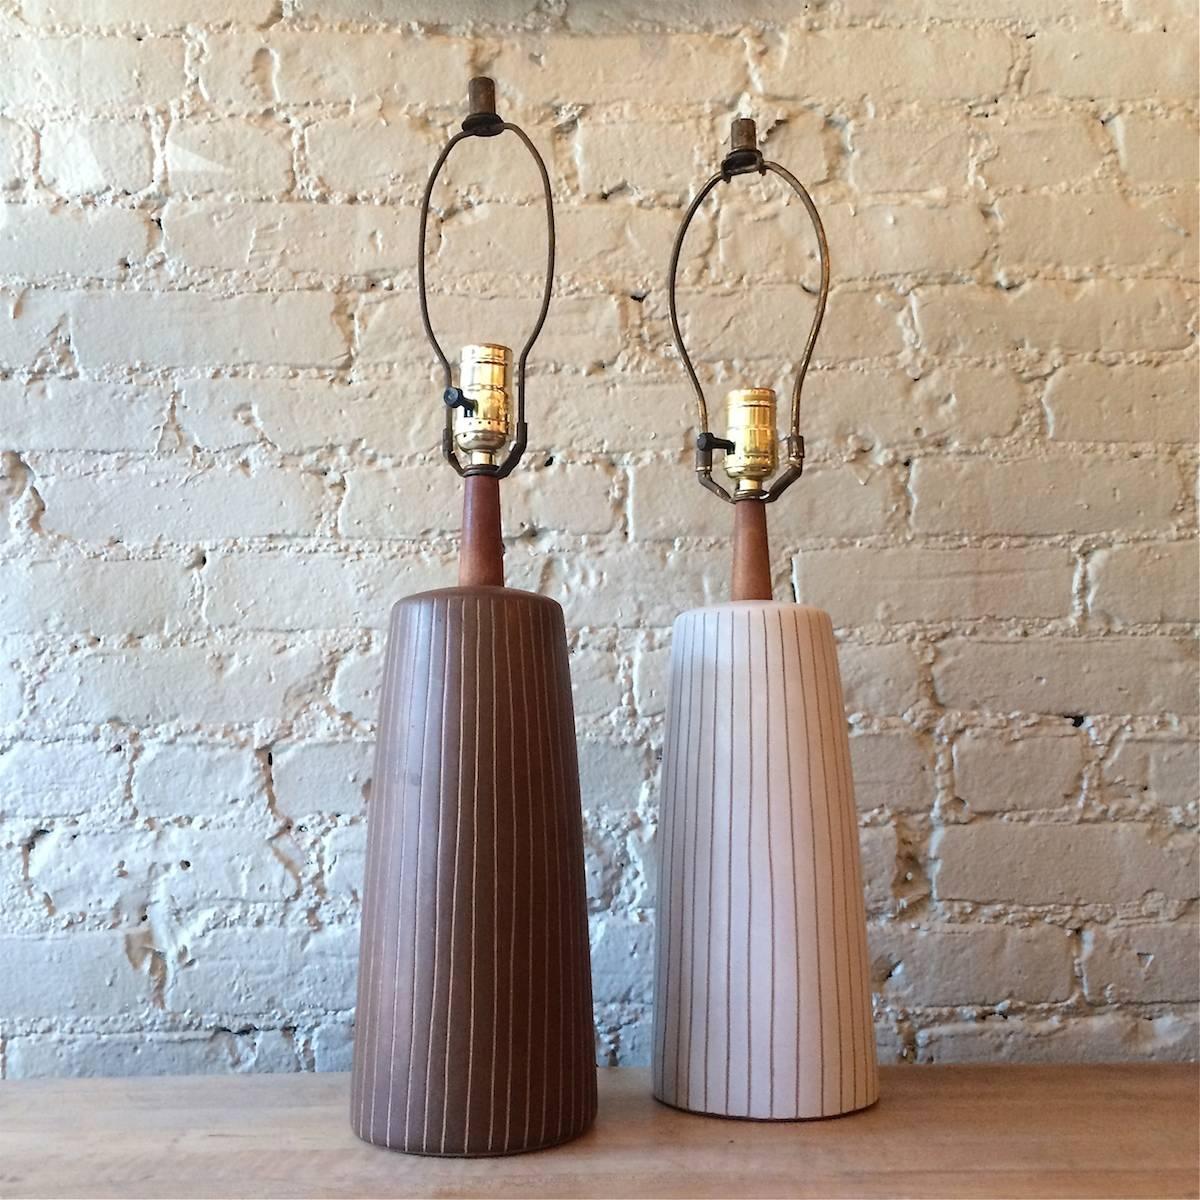 Pair of contrasting, brown and cream, incised ceramic, art pottery, table lamps by Gordon Martz for Marshall Studios with teak accents.